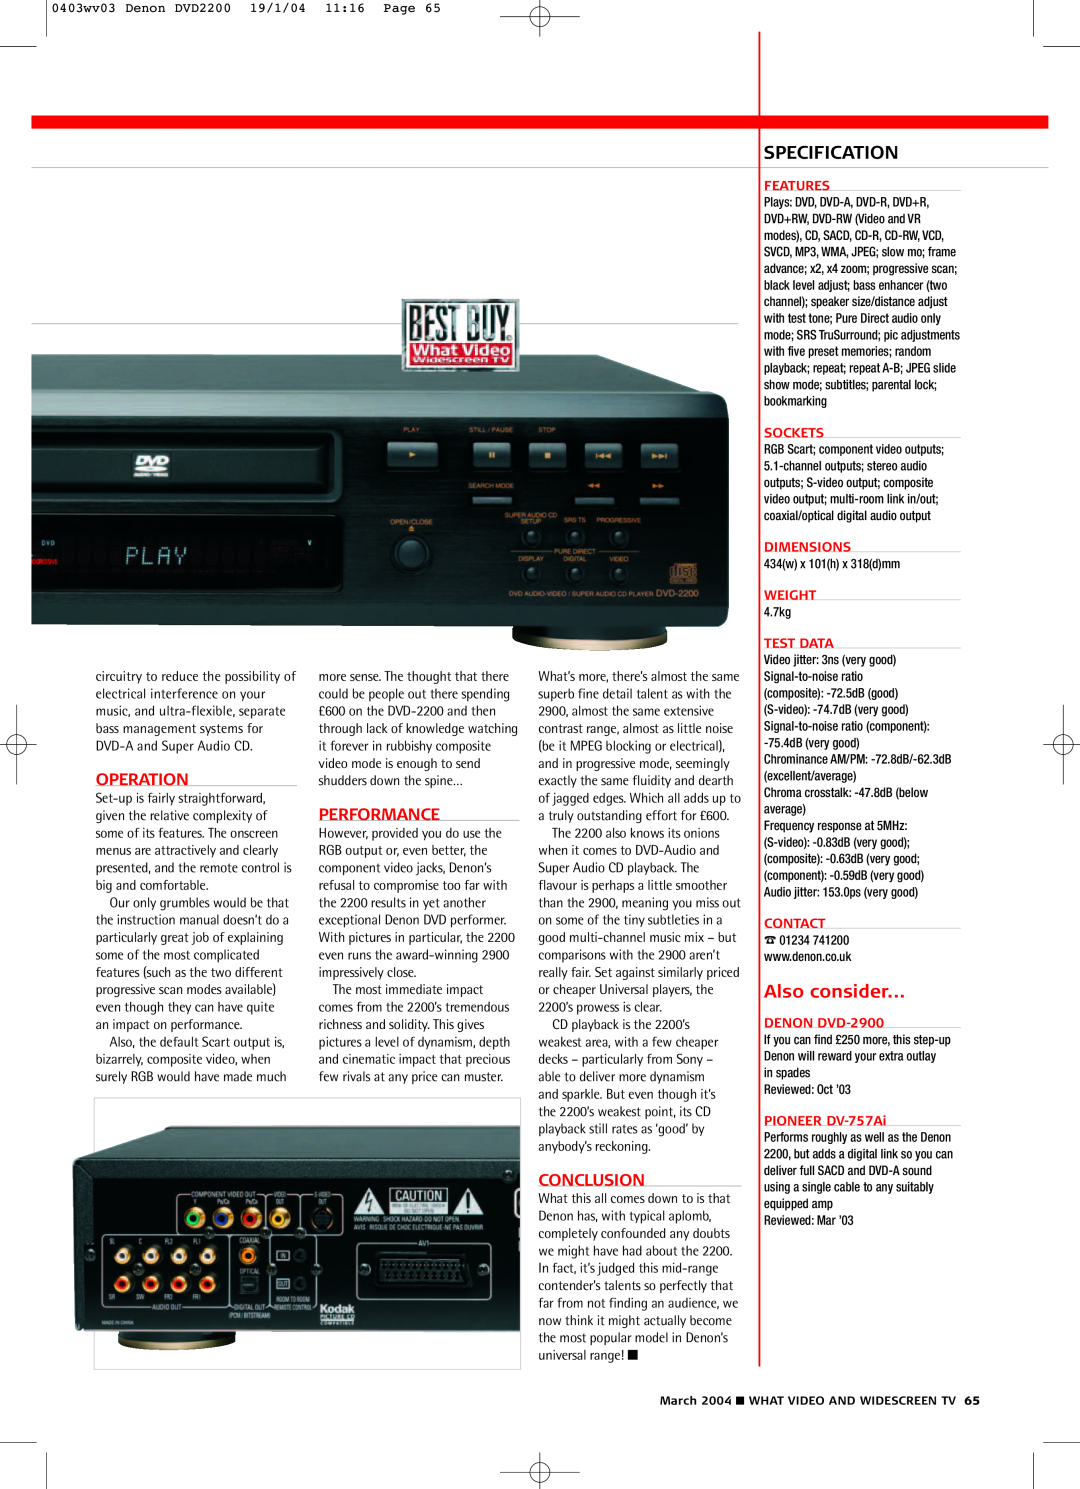 Denon DVD-2900 manual Specification, Operation, Performance, Conclusion, 0403wv03 Denon DVD2200 19/1/04 1116 Page, Features 